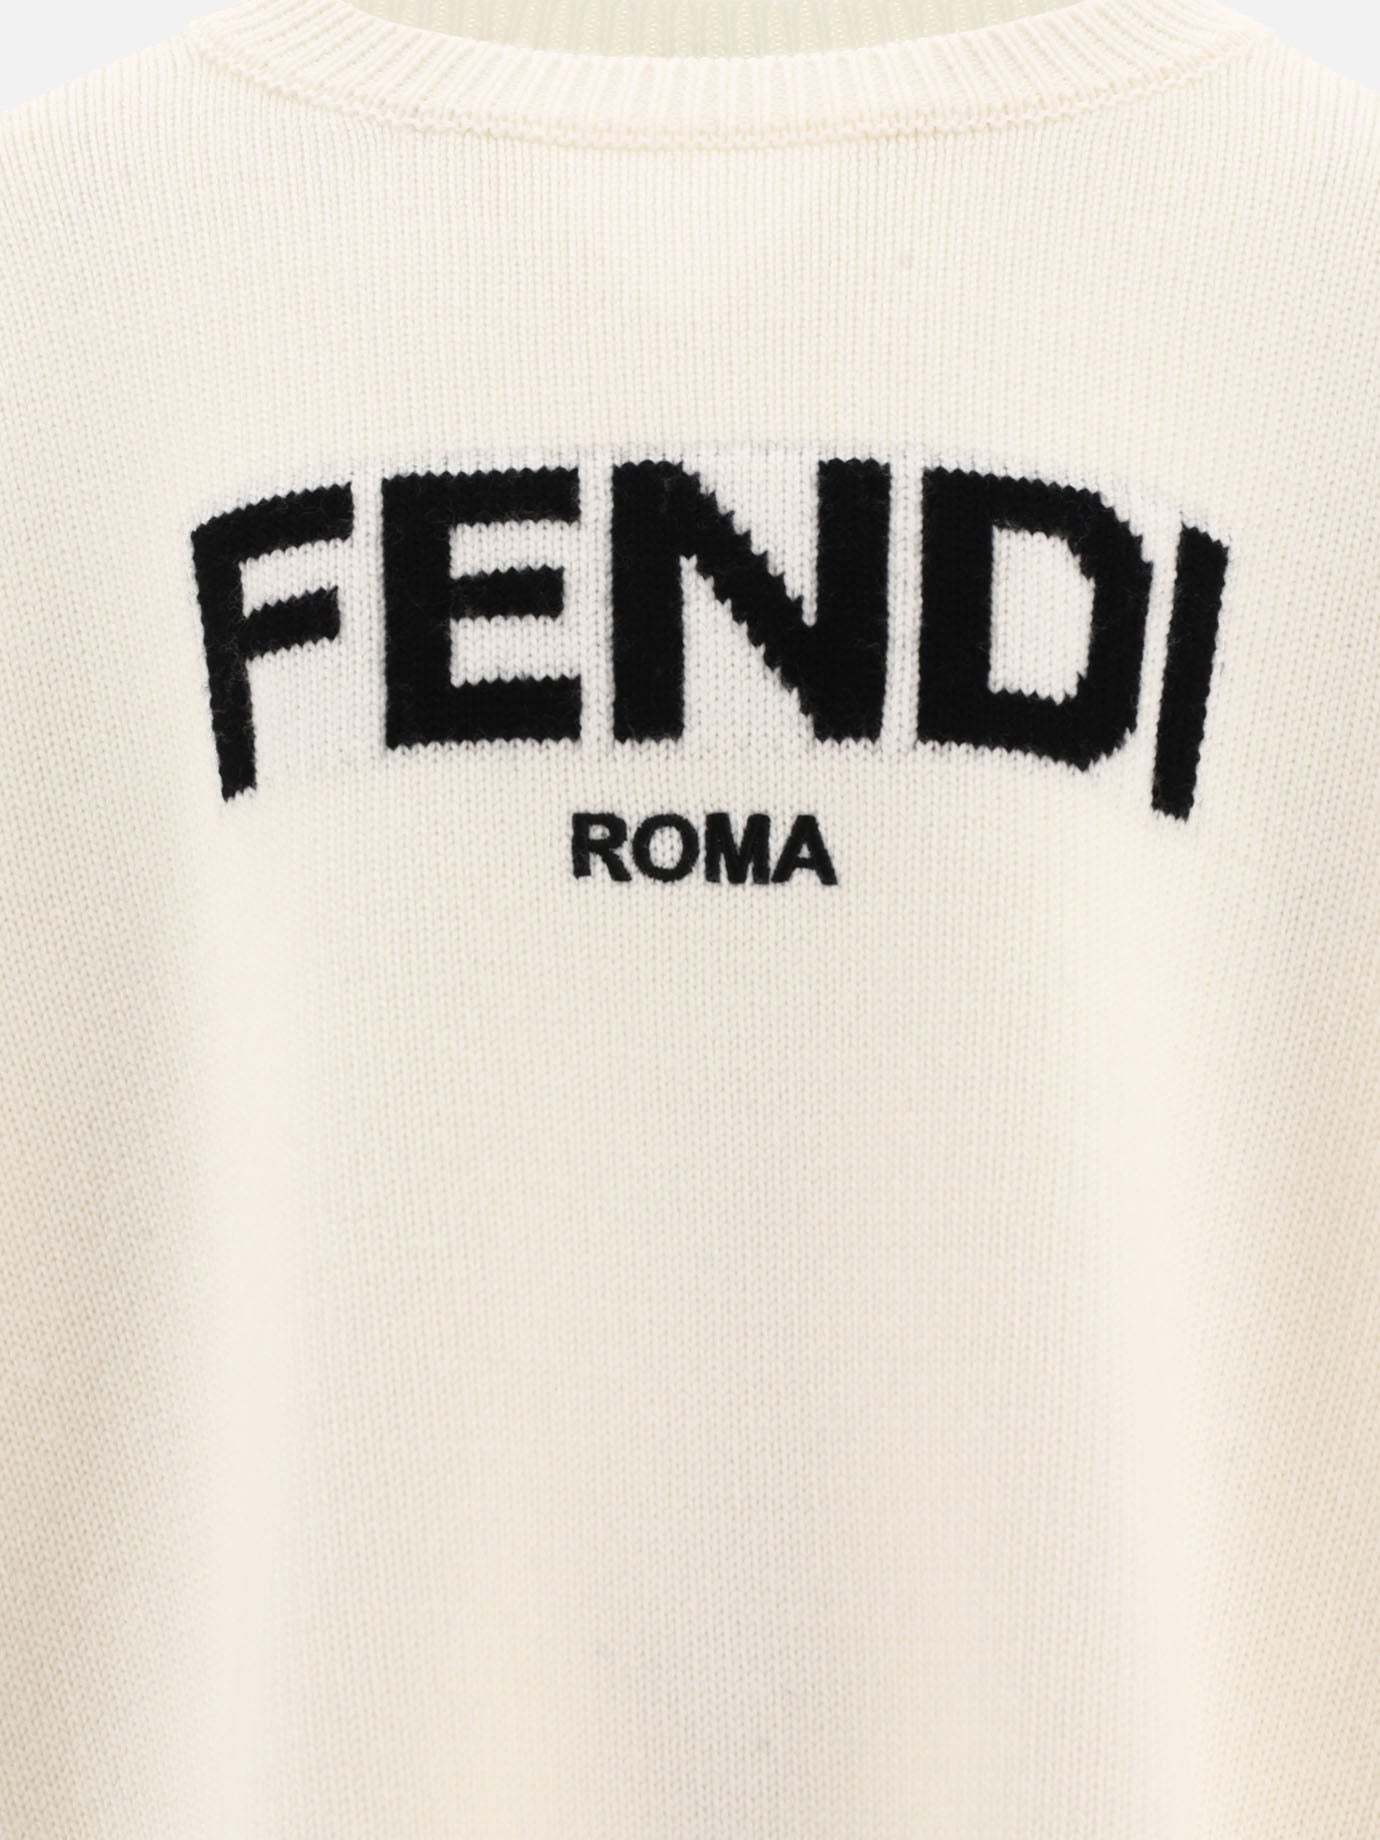 Wool sweater with Fendi lettering